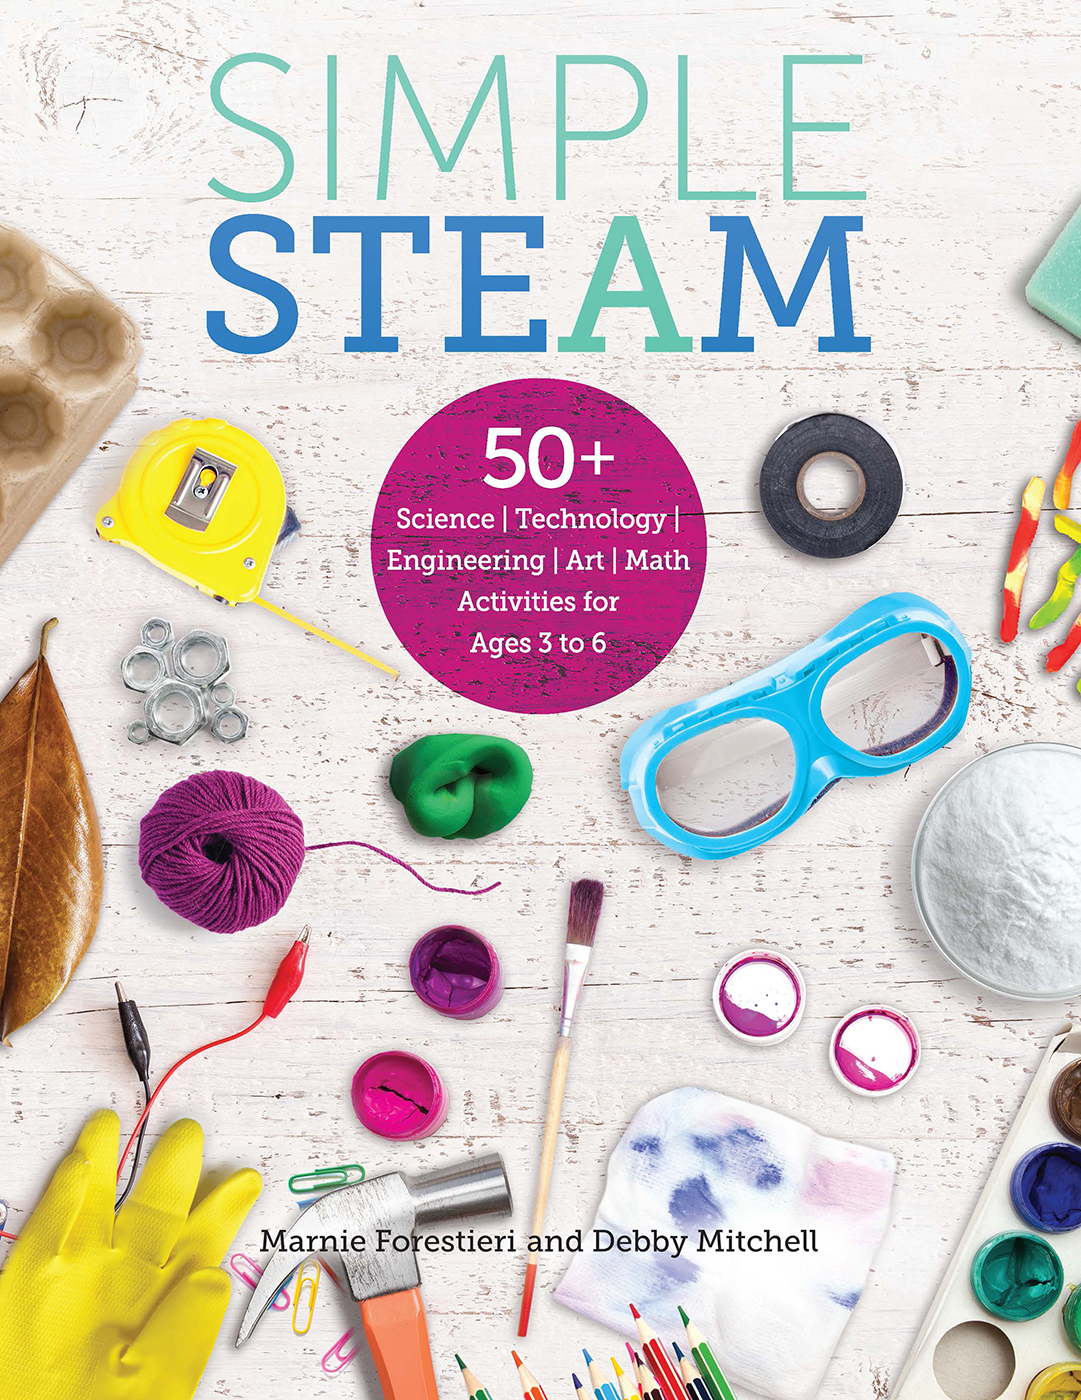 Simple STEAM 50+ Science Technology Engineering Art and Math Activities for Ages 3 to 6 cover image